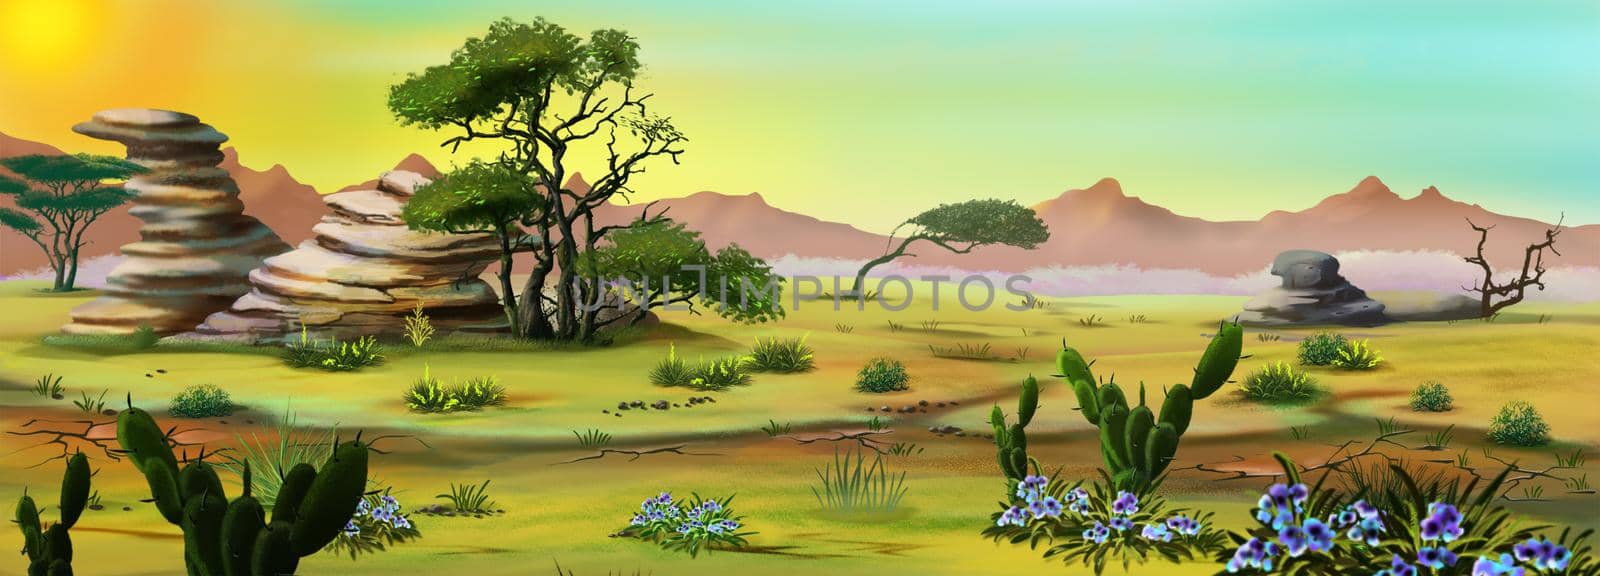 Early morning in the African savannah 01 by Multipedia